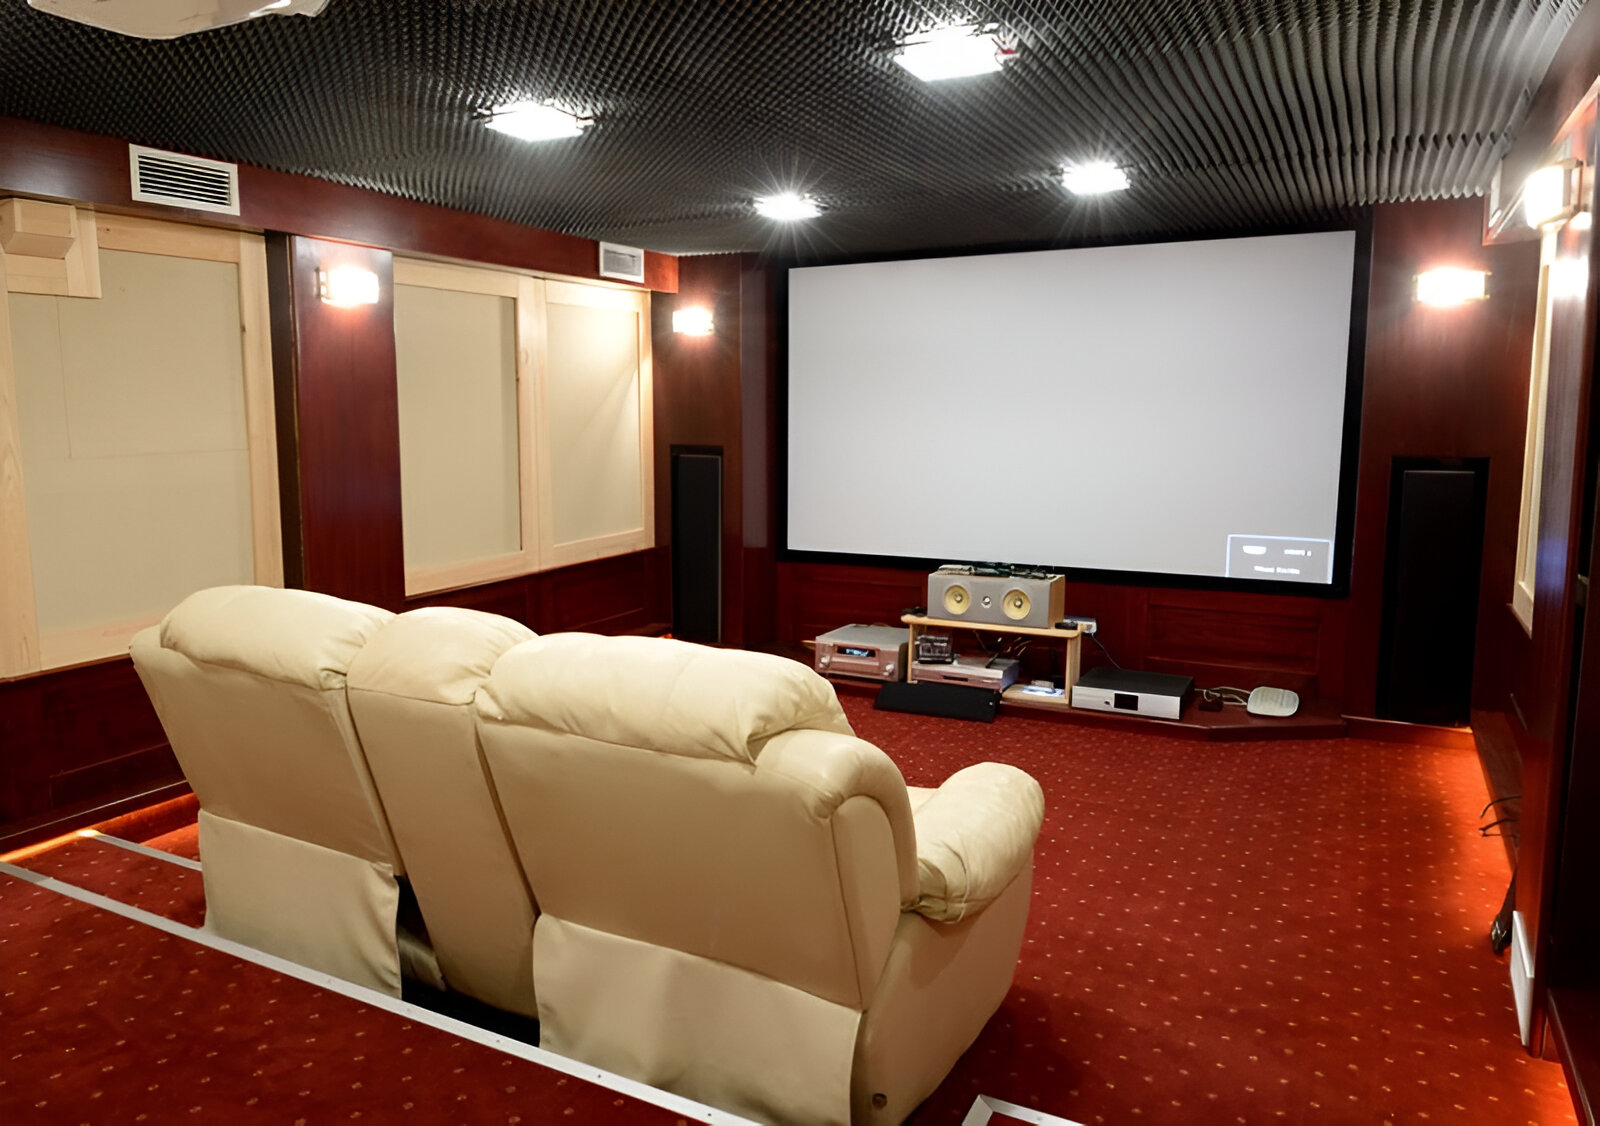 How To Install Motorized Home Theater Projector Screens